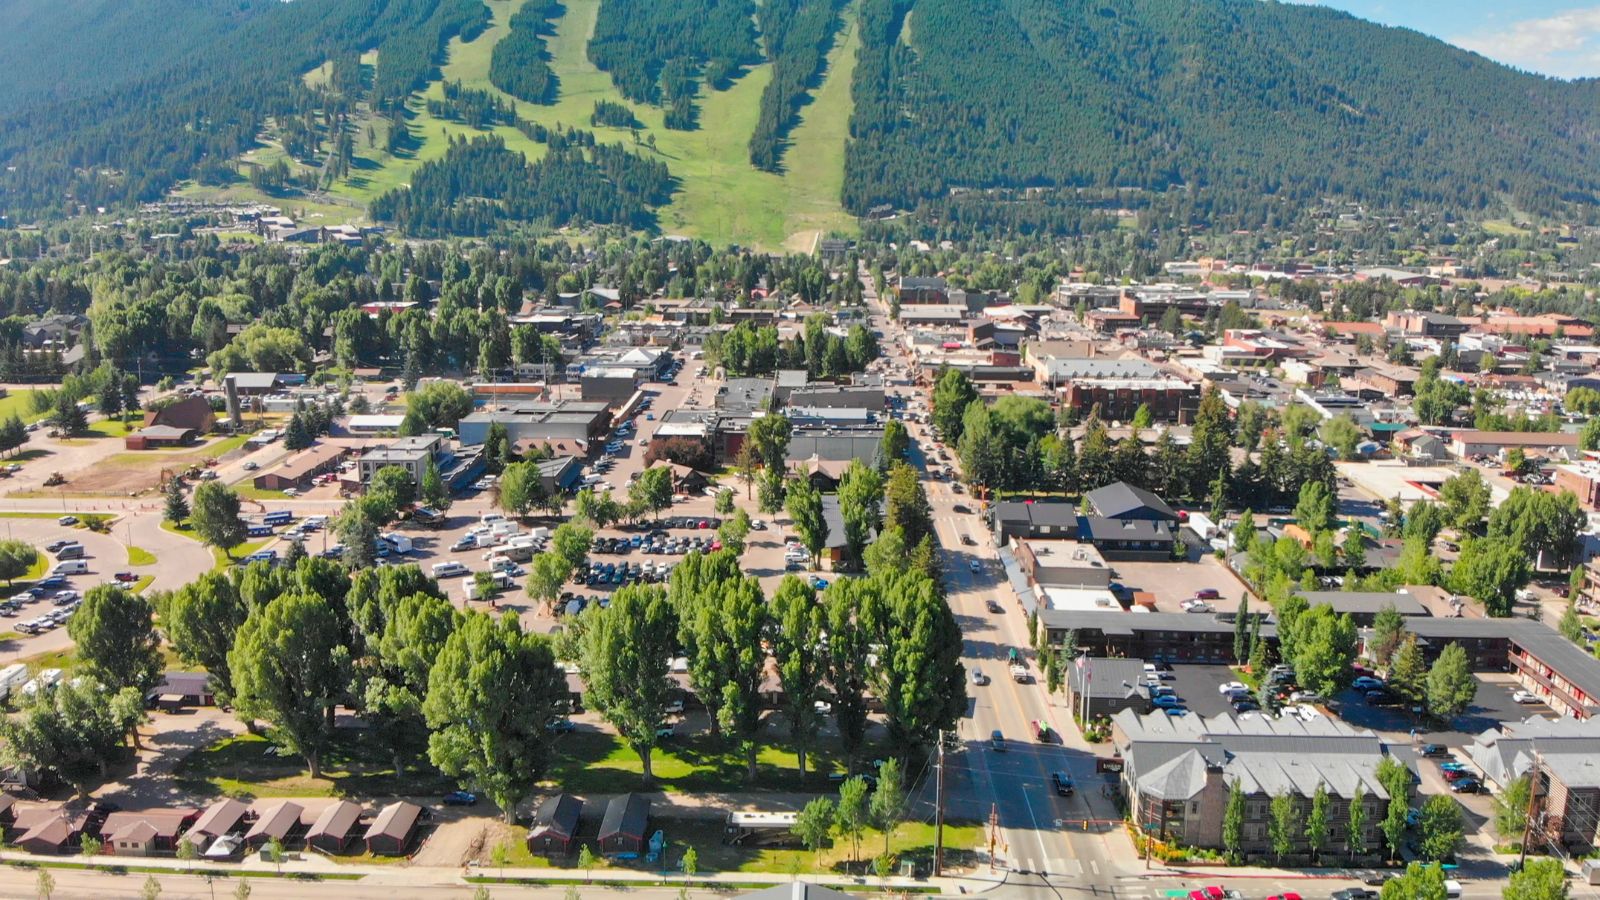 <p>Jackson, a town that many say resembles paradise and is a perfect haven for those looking for adventure and who love nature, has been celebrating its traditions for centuries. Some of these include the Jackson Hole Elkfest, which celebrates the migration of the thousands of elk that migrate to the county.</p>